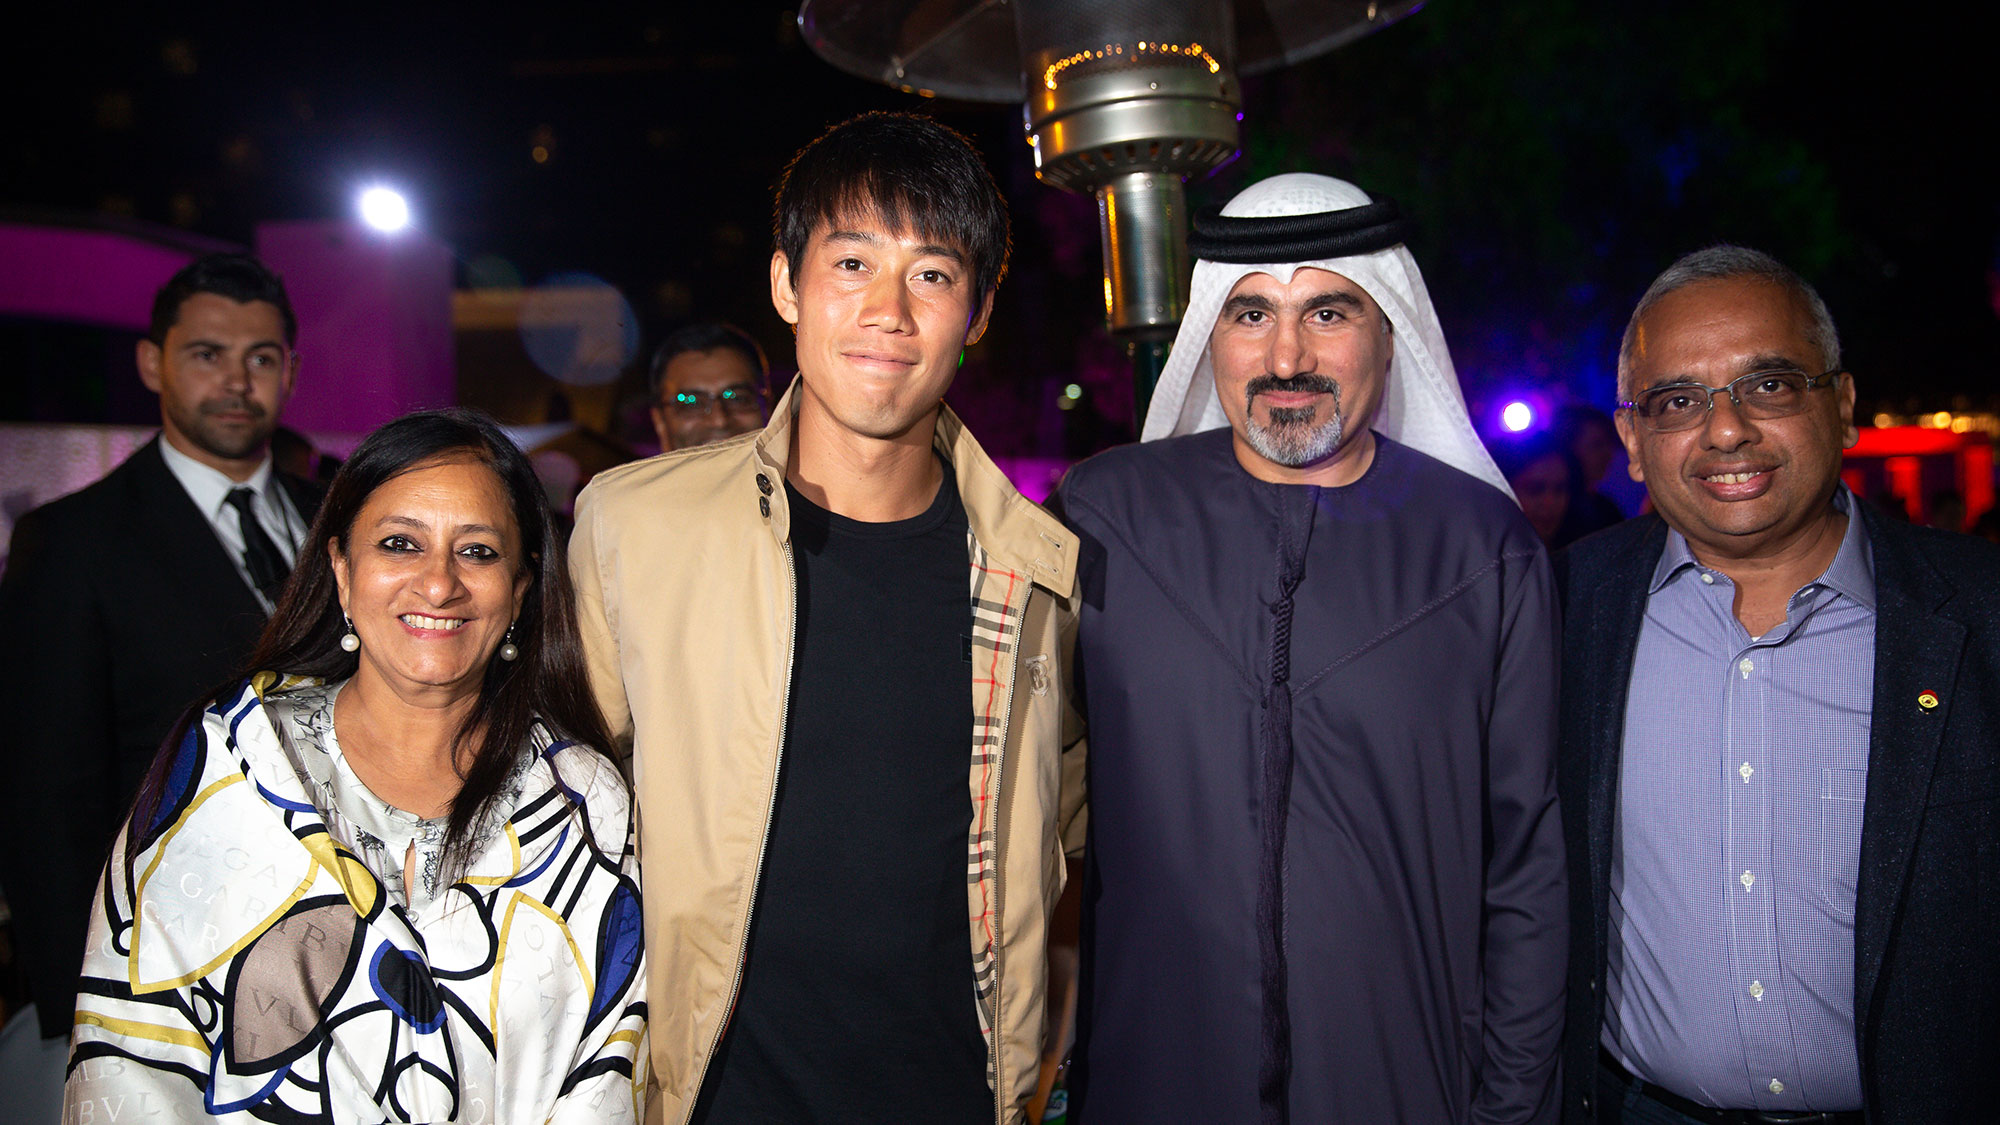 Off court at the Dubai Duty Free Championships: Parties, polo and penguins